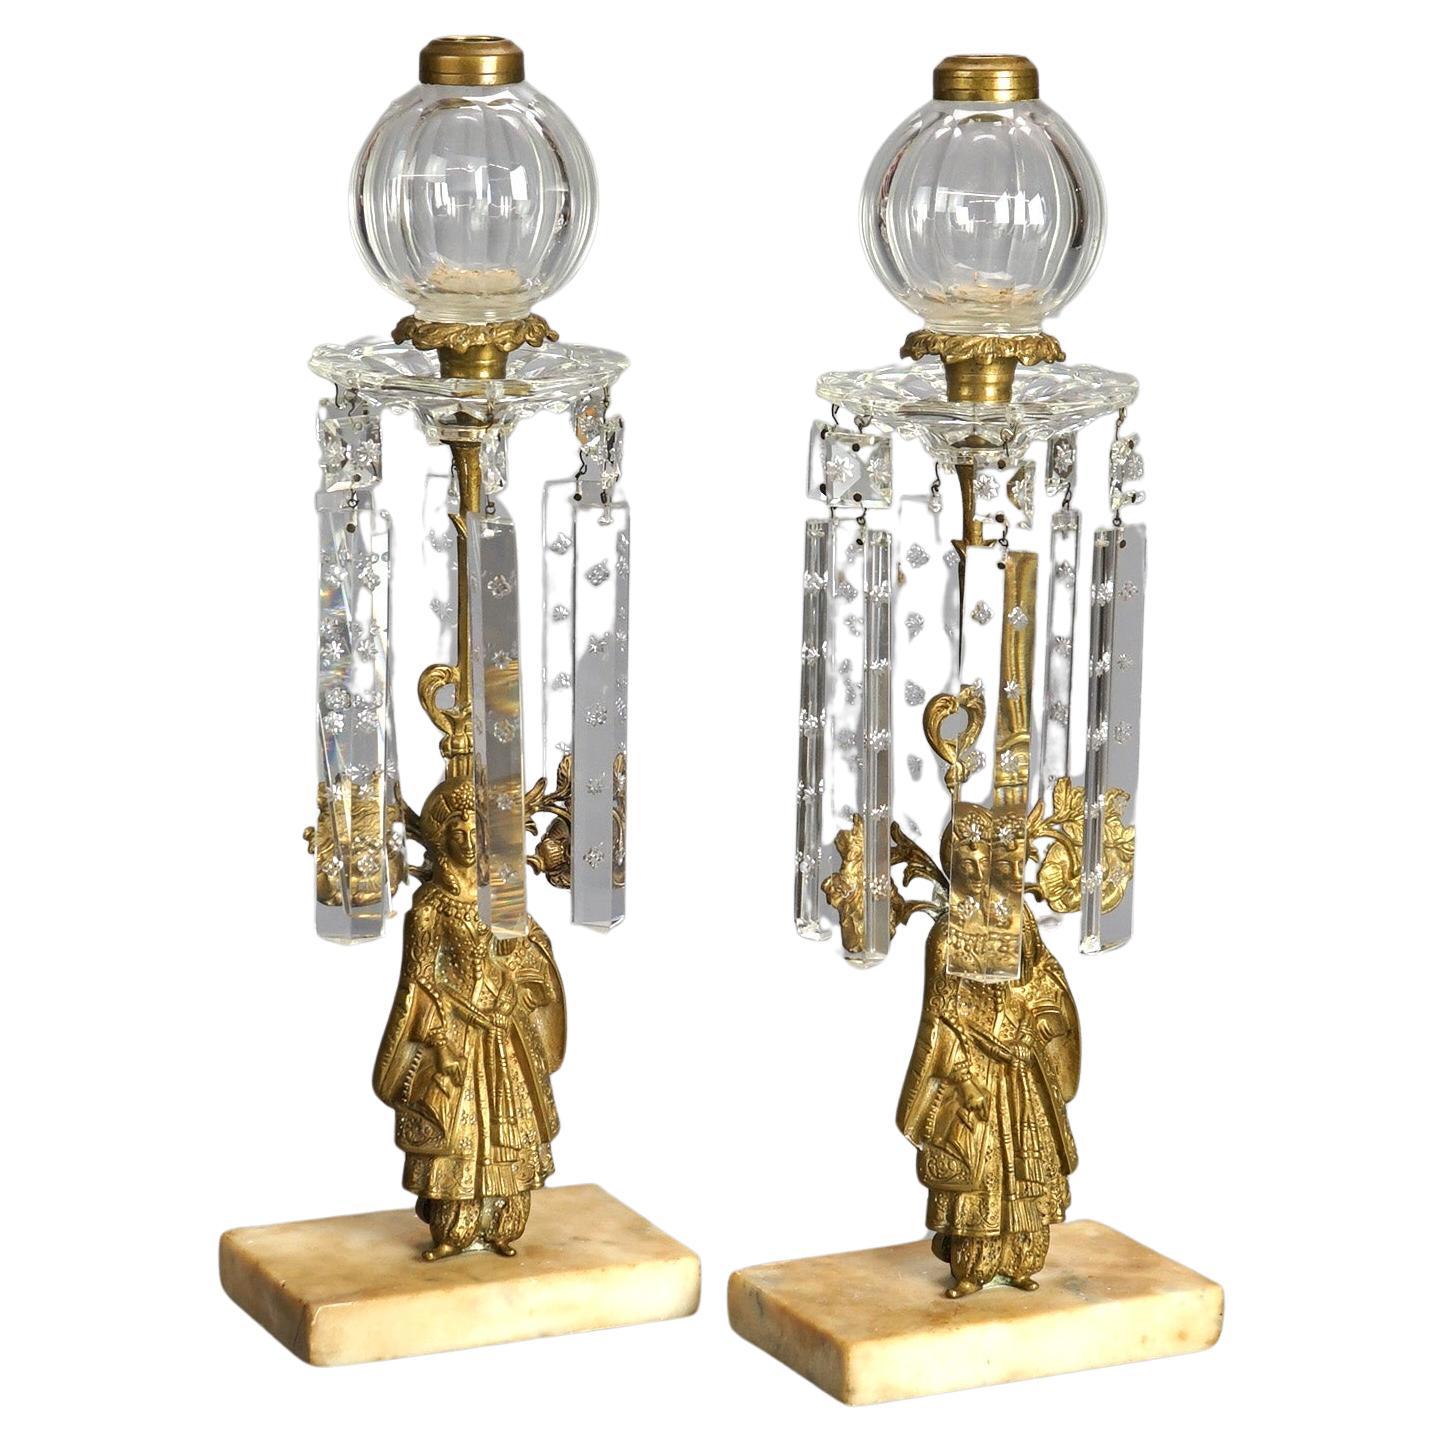 Antique Pair Figural Girandole Sultana Design Oil Lamps with Crystals C1880 For Sale